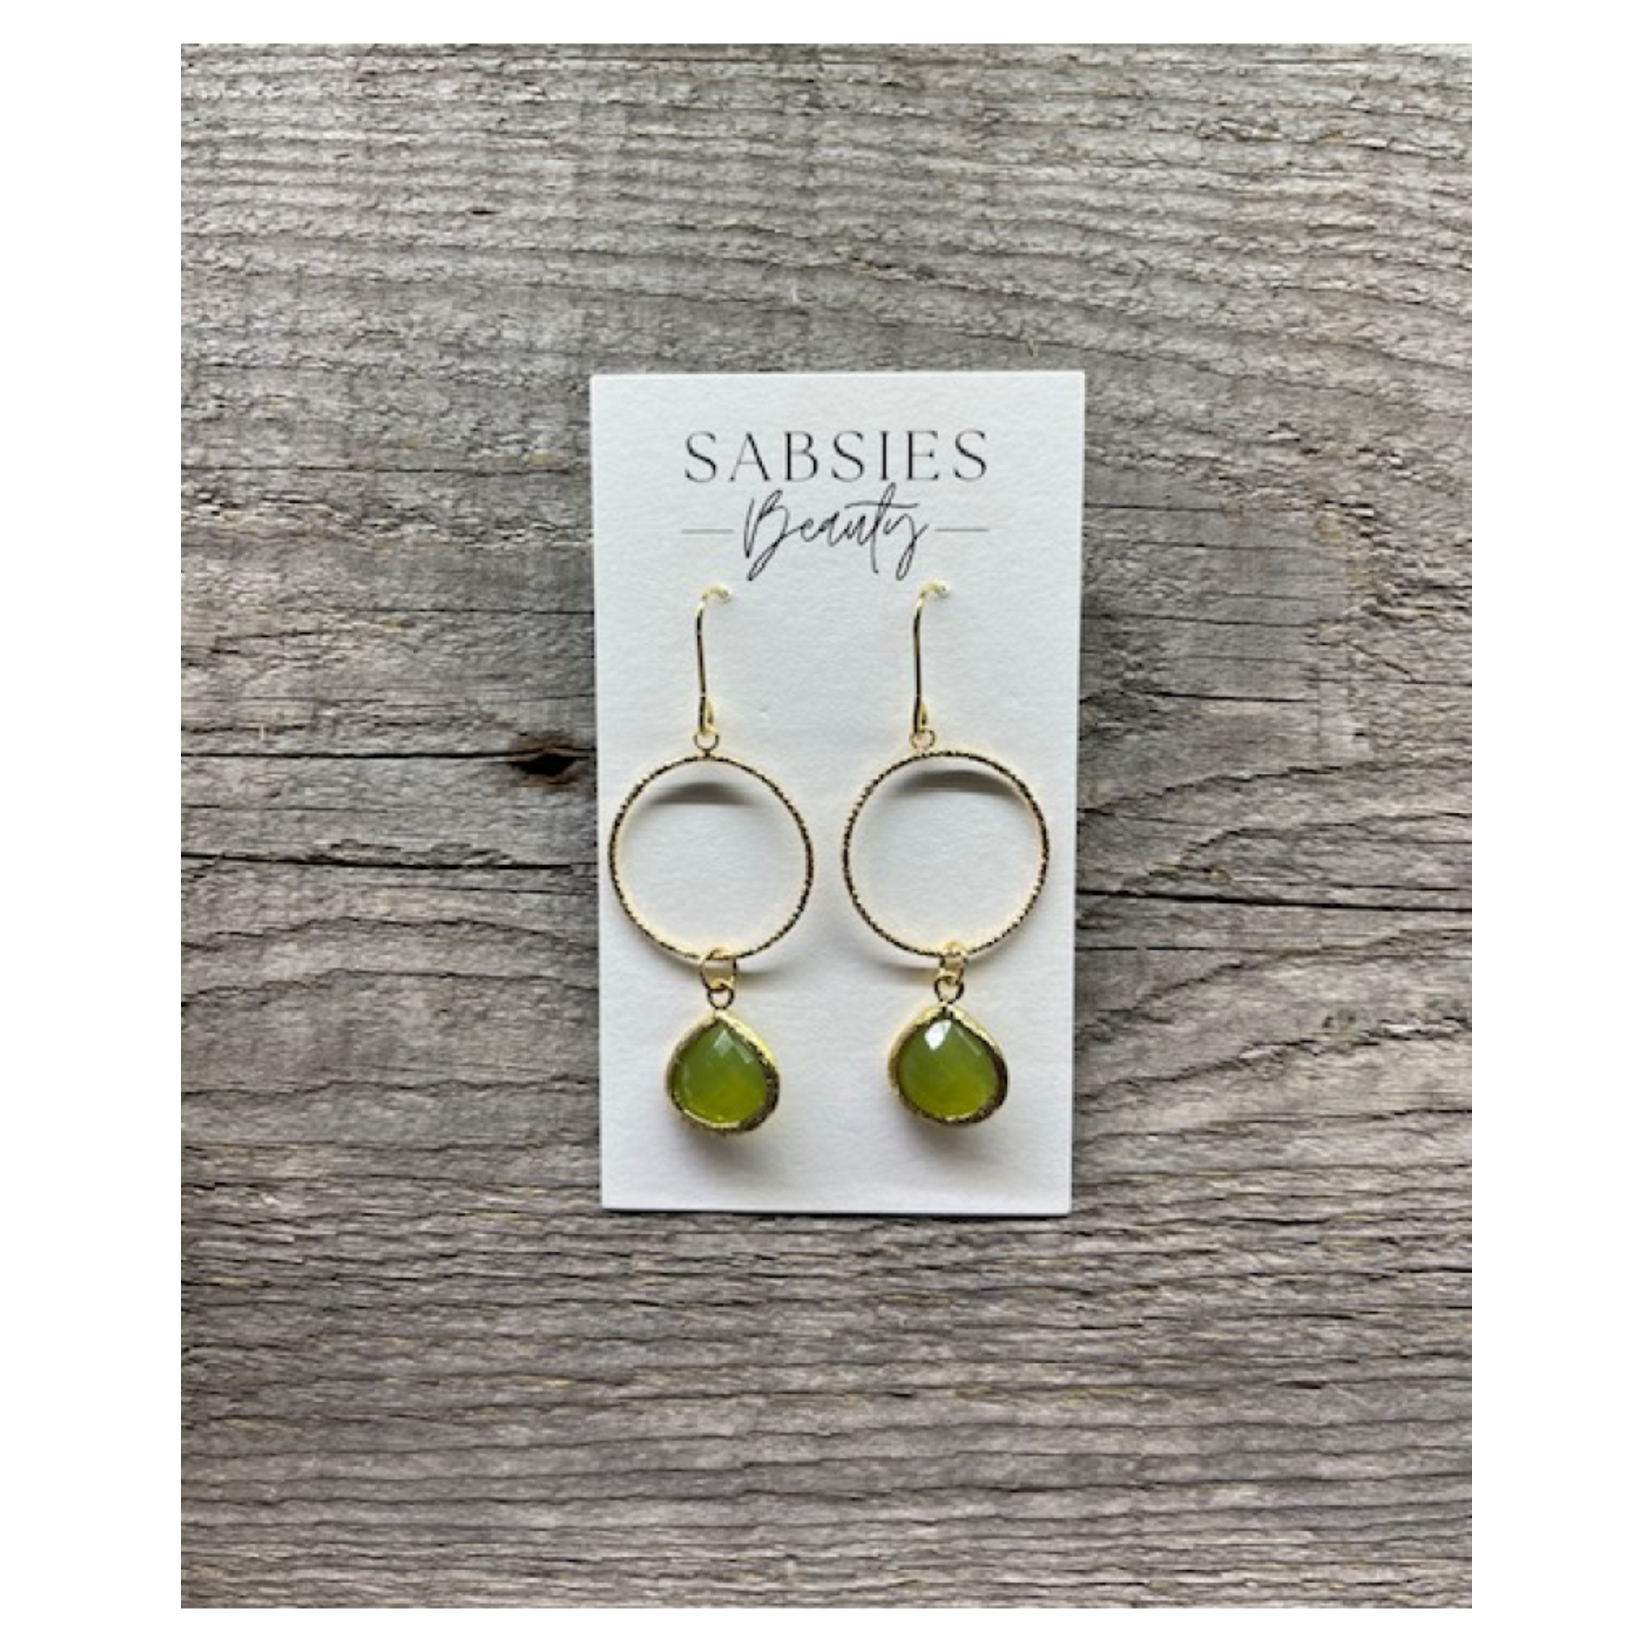 Earrings - Gold Hoop with Green Jewels